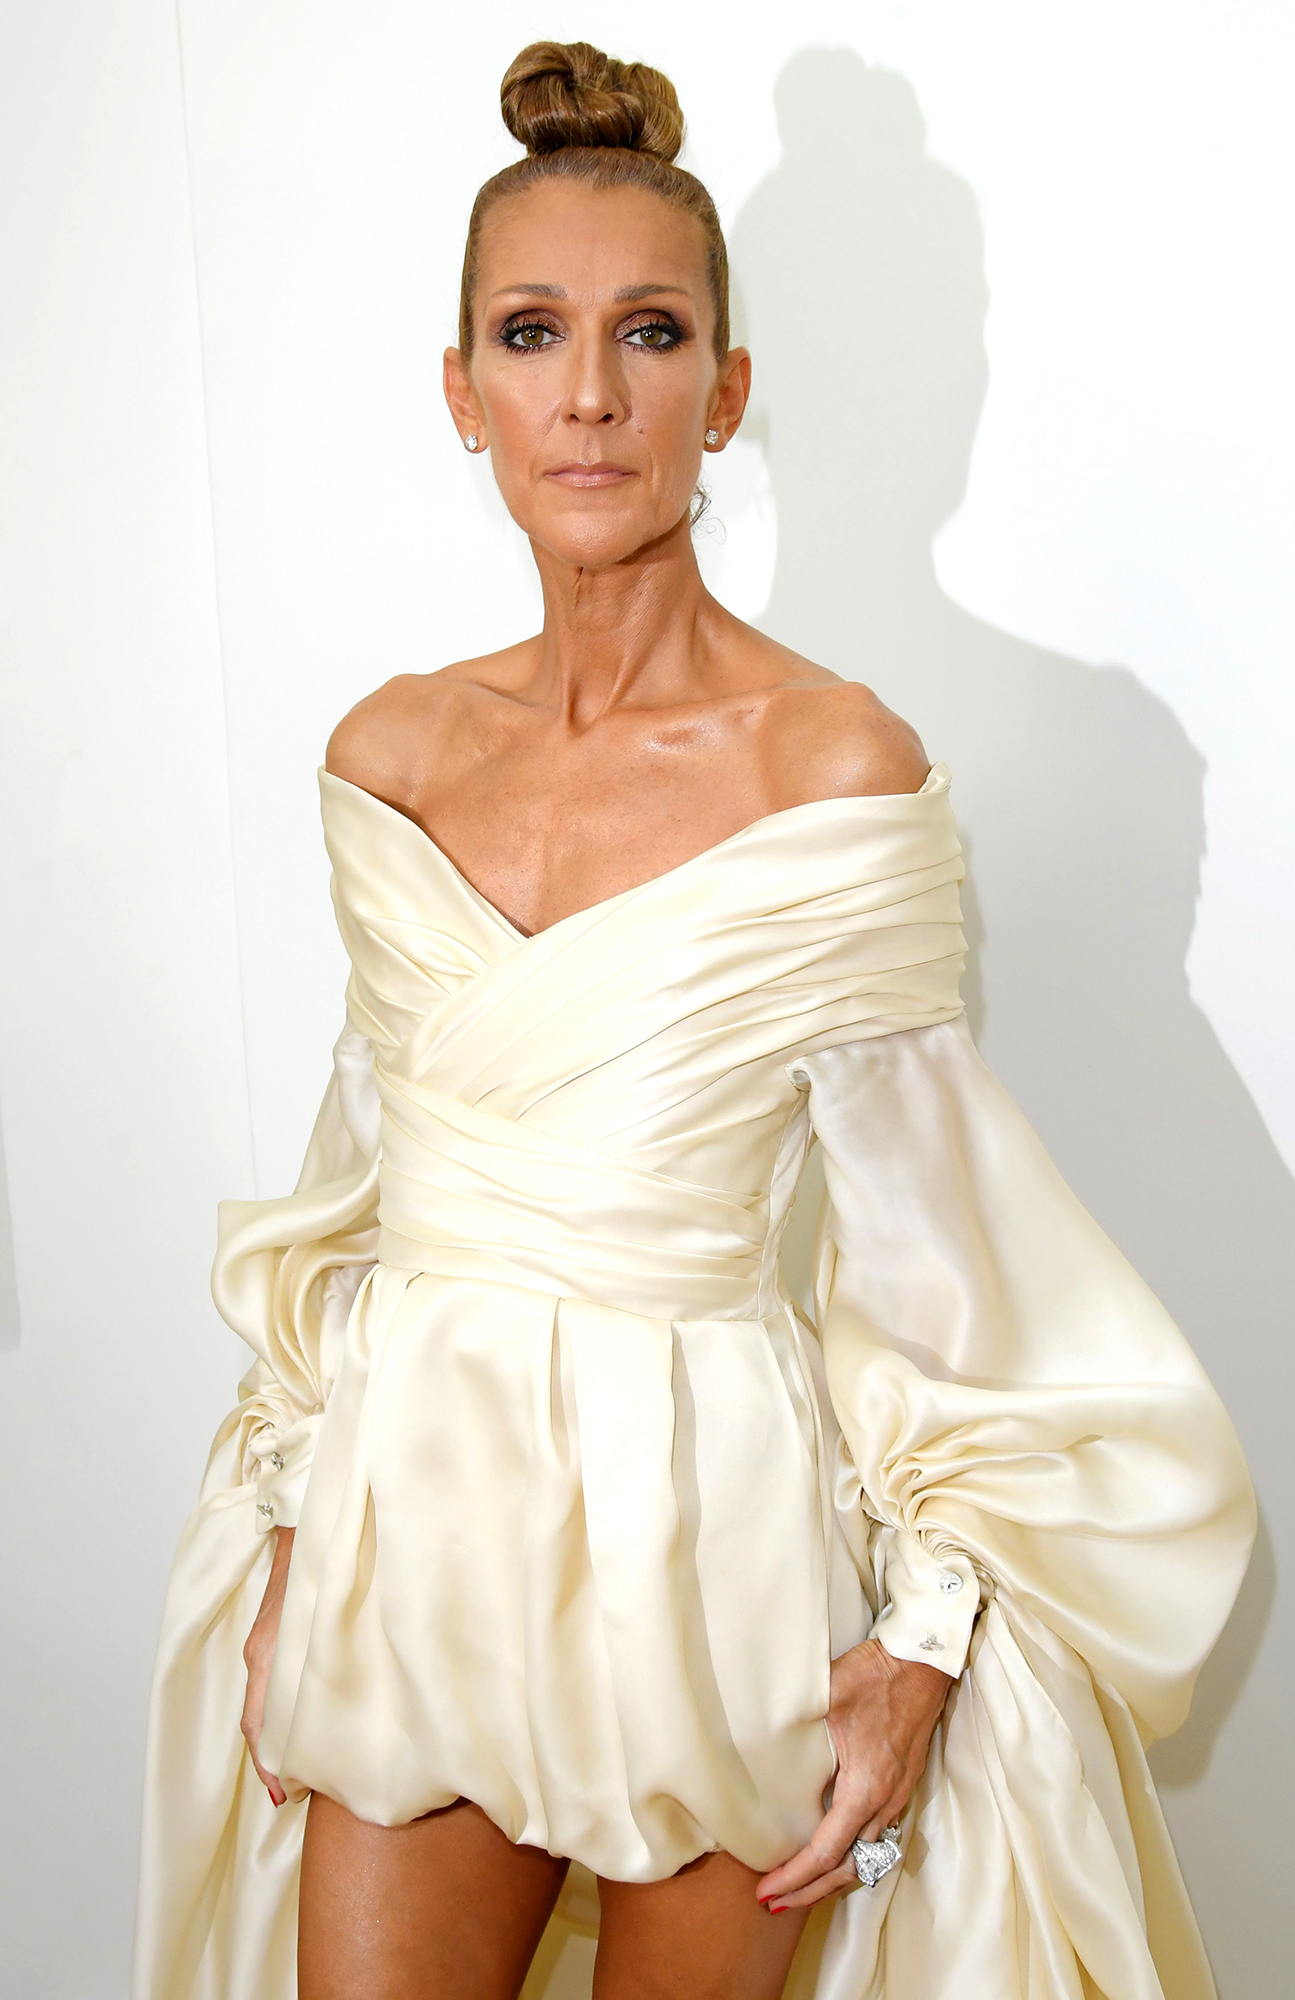 Celine Dion reveals she was diagnosed with rare neurological disease